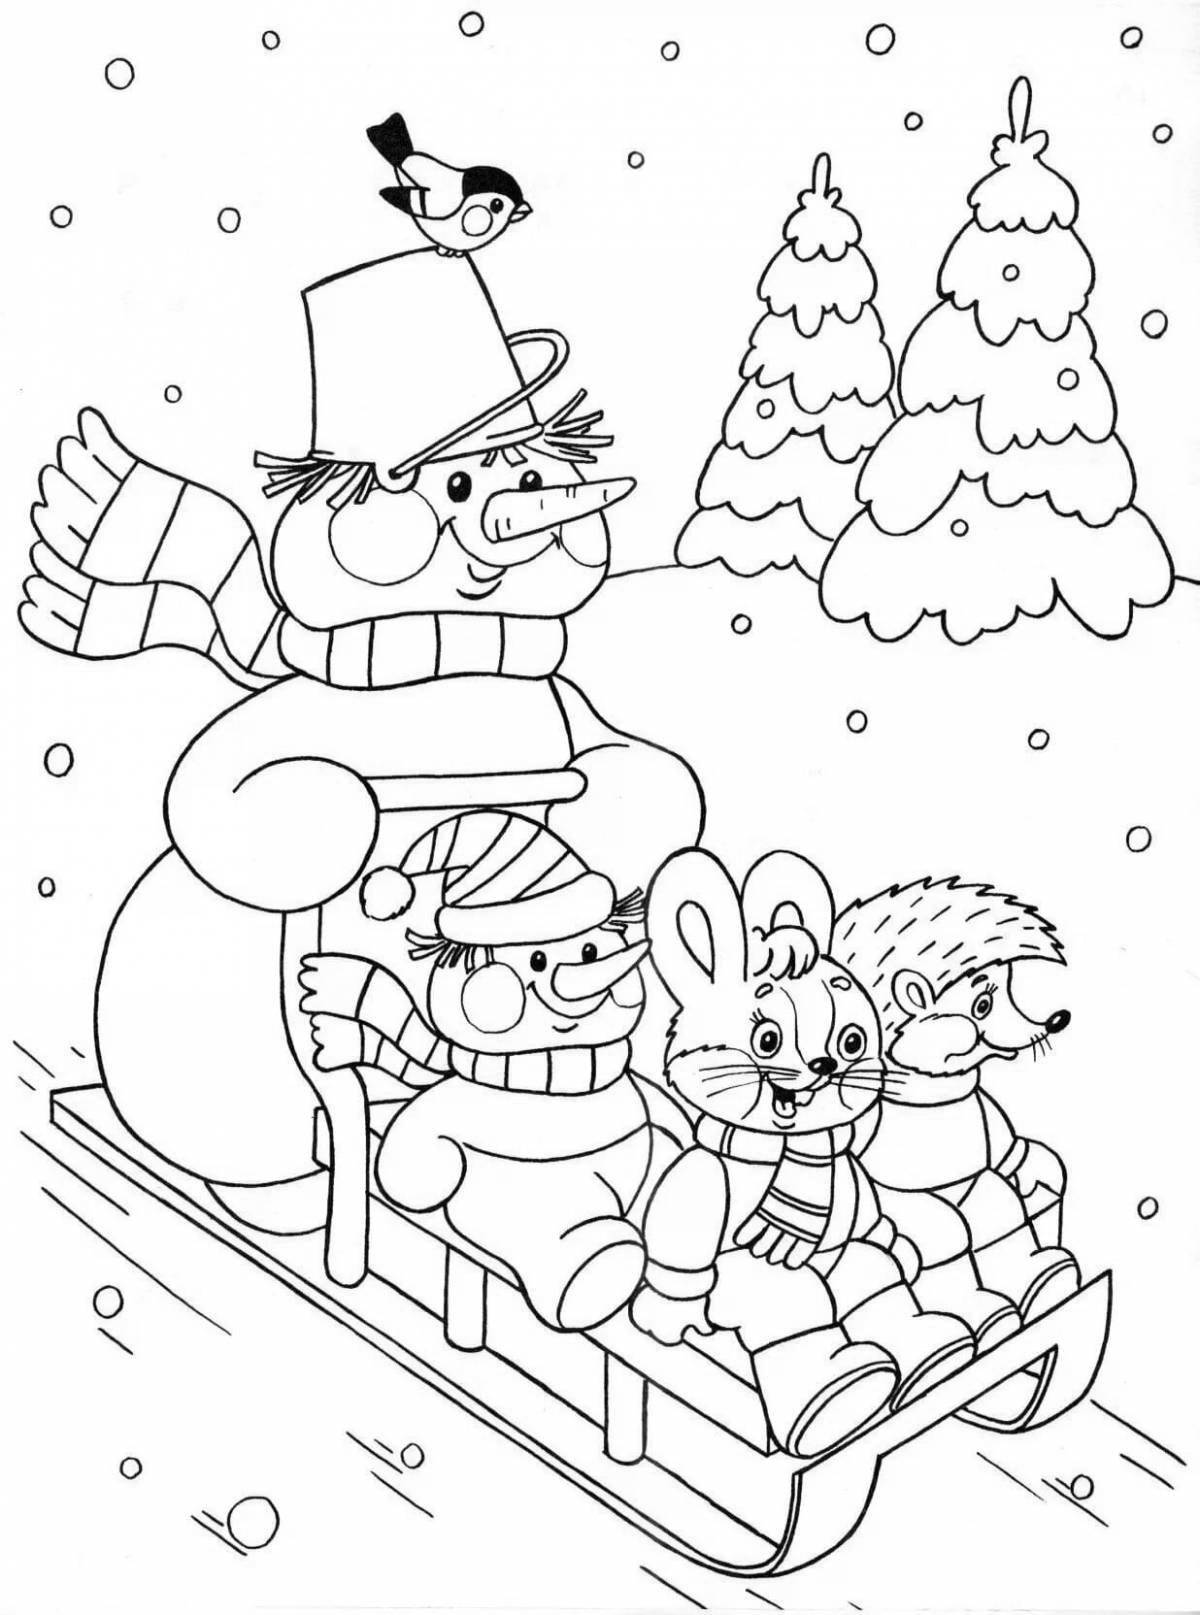 Dazzling winter coloring book for 5 year olds